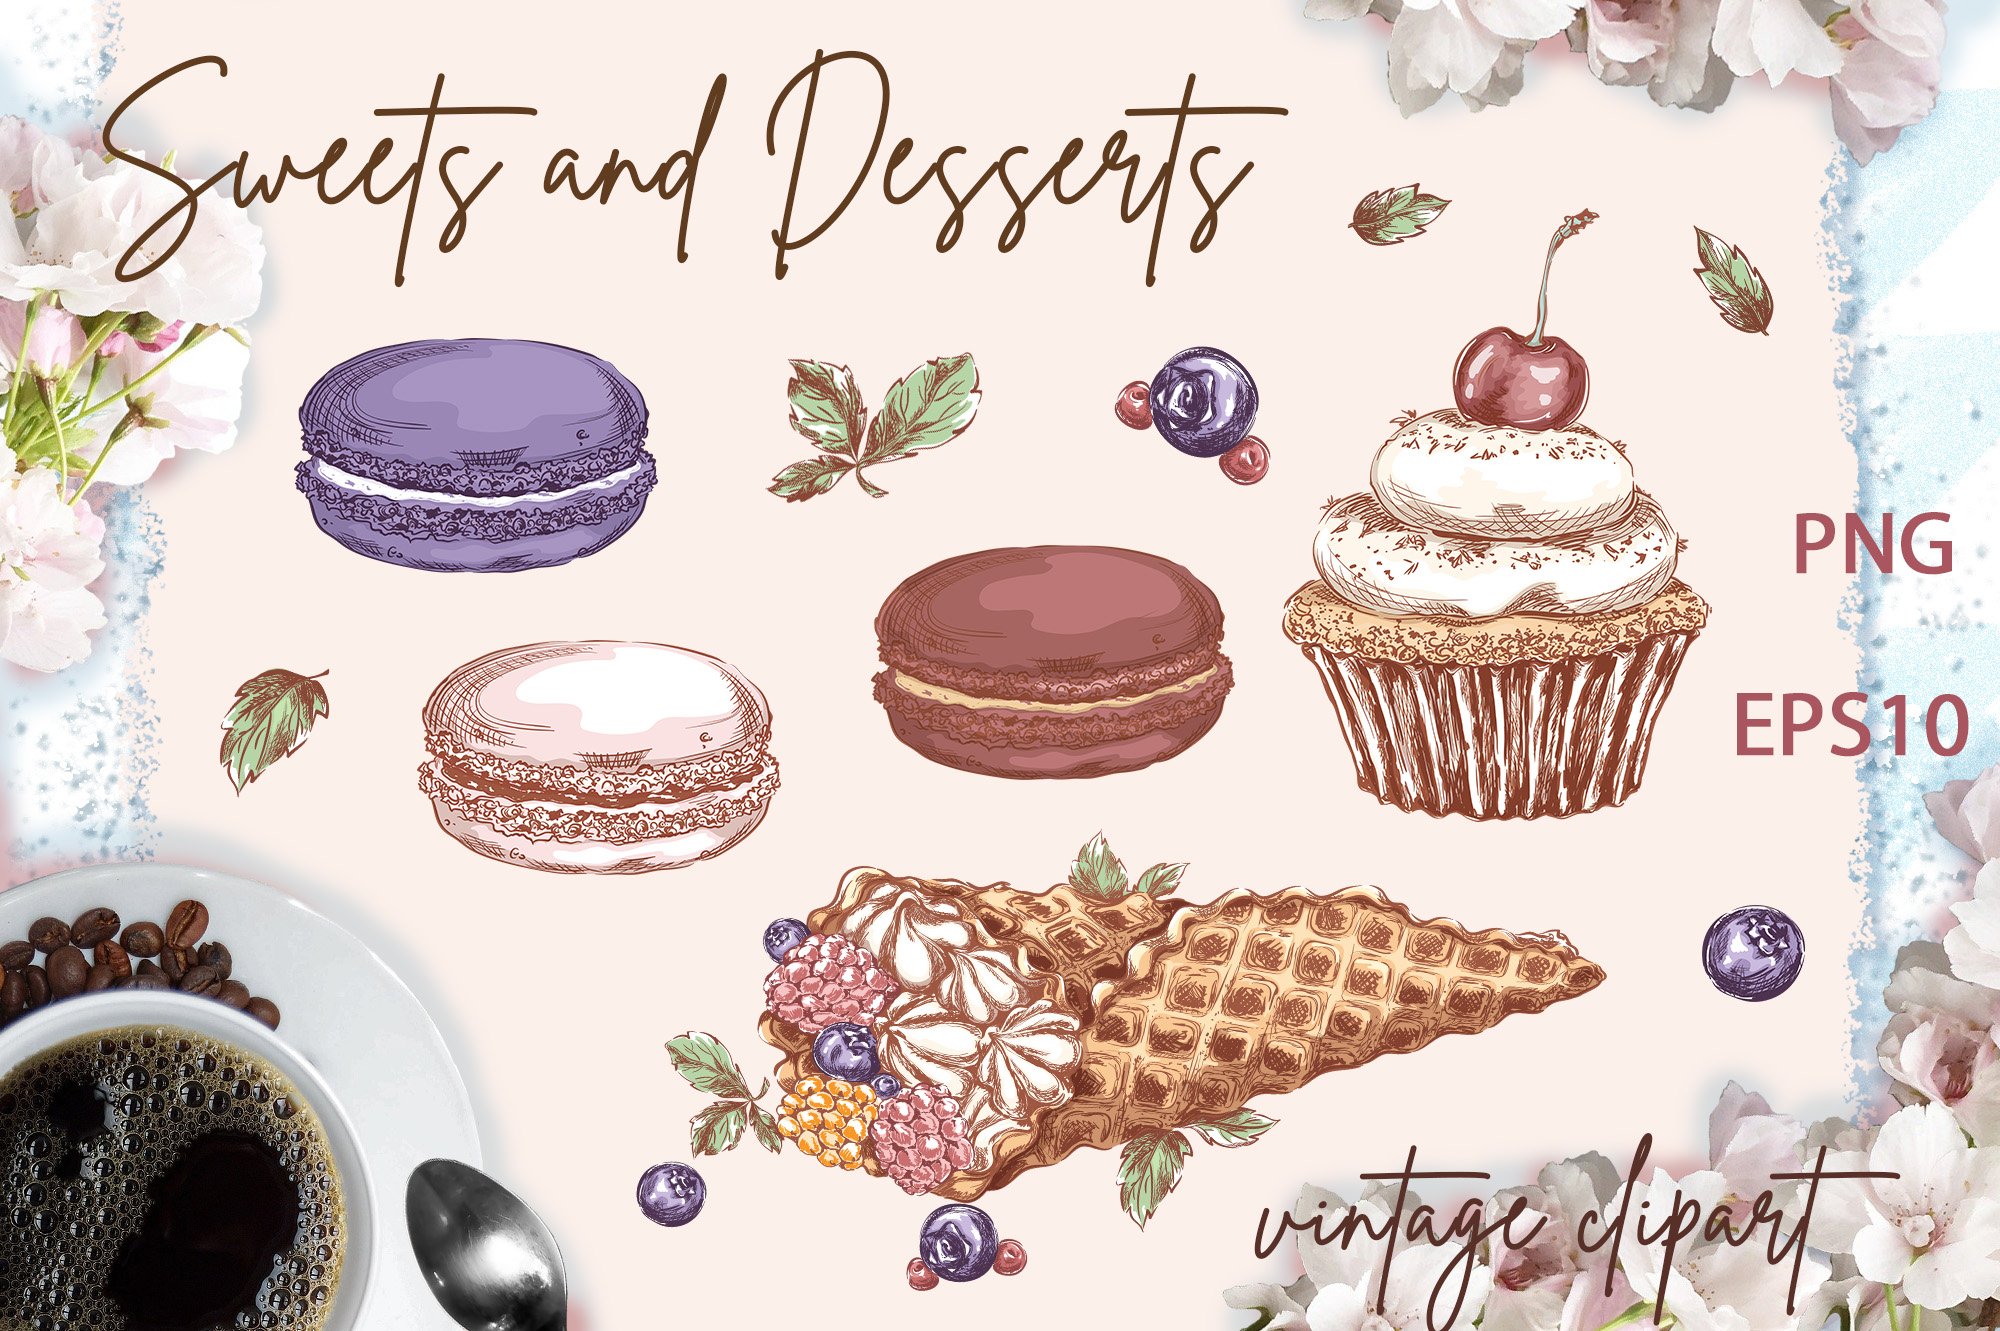 Pastel illustrations with different kinds of desserts.